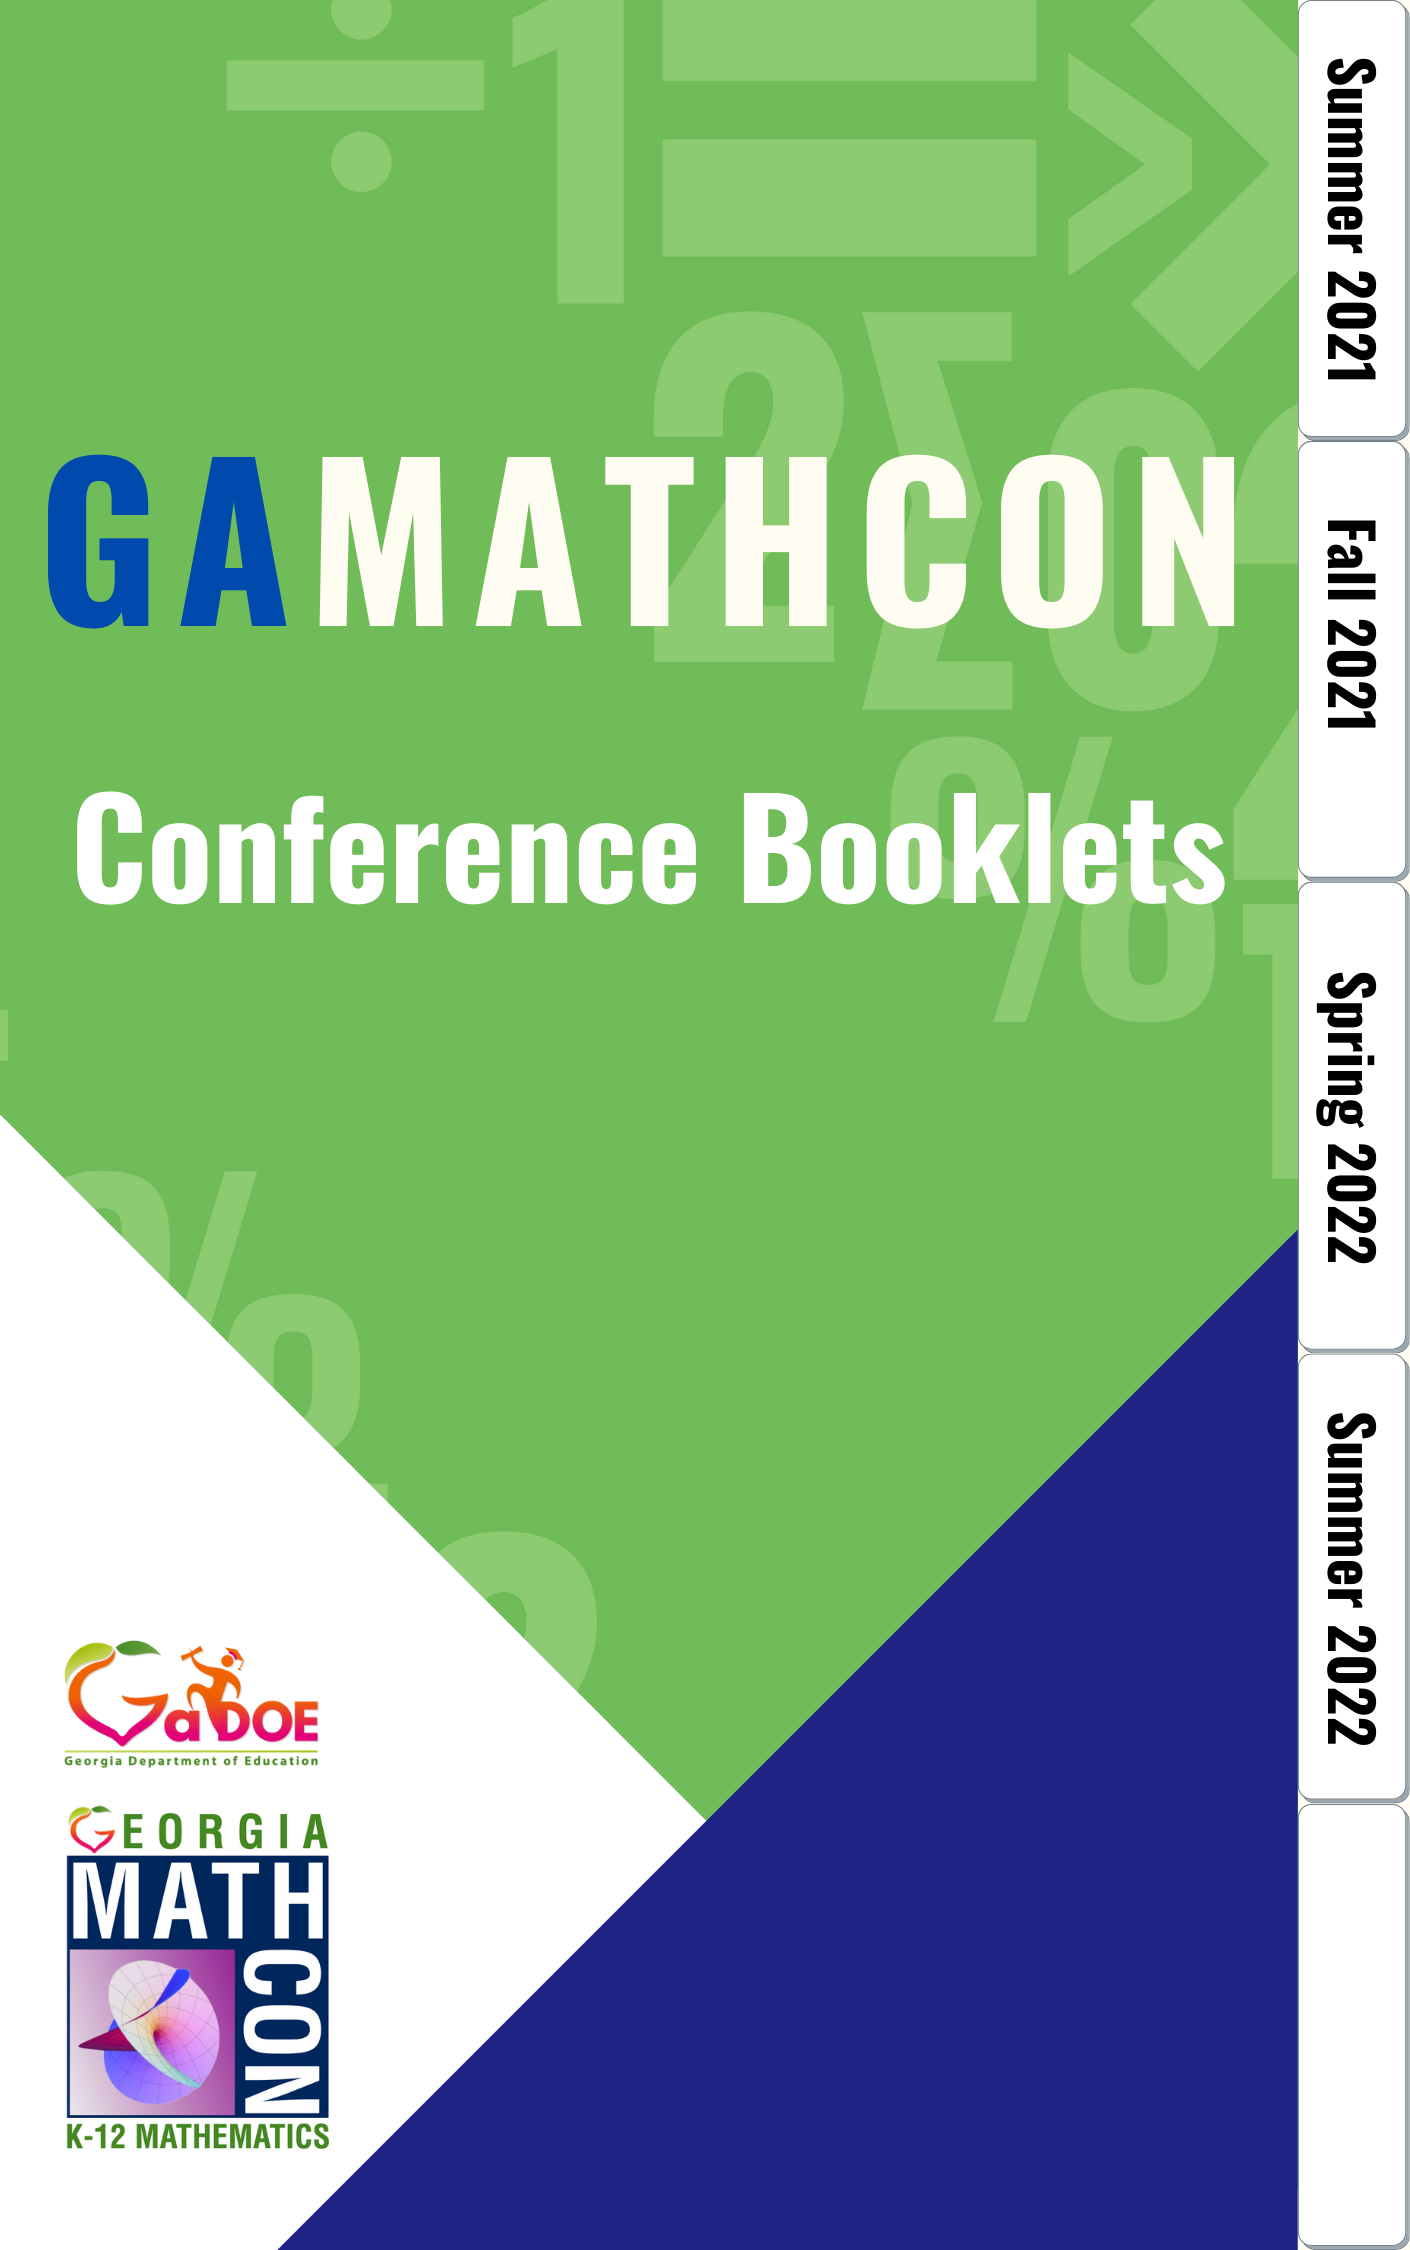 Conference Booklet (1).png